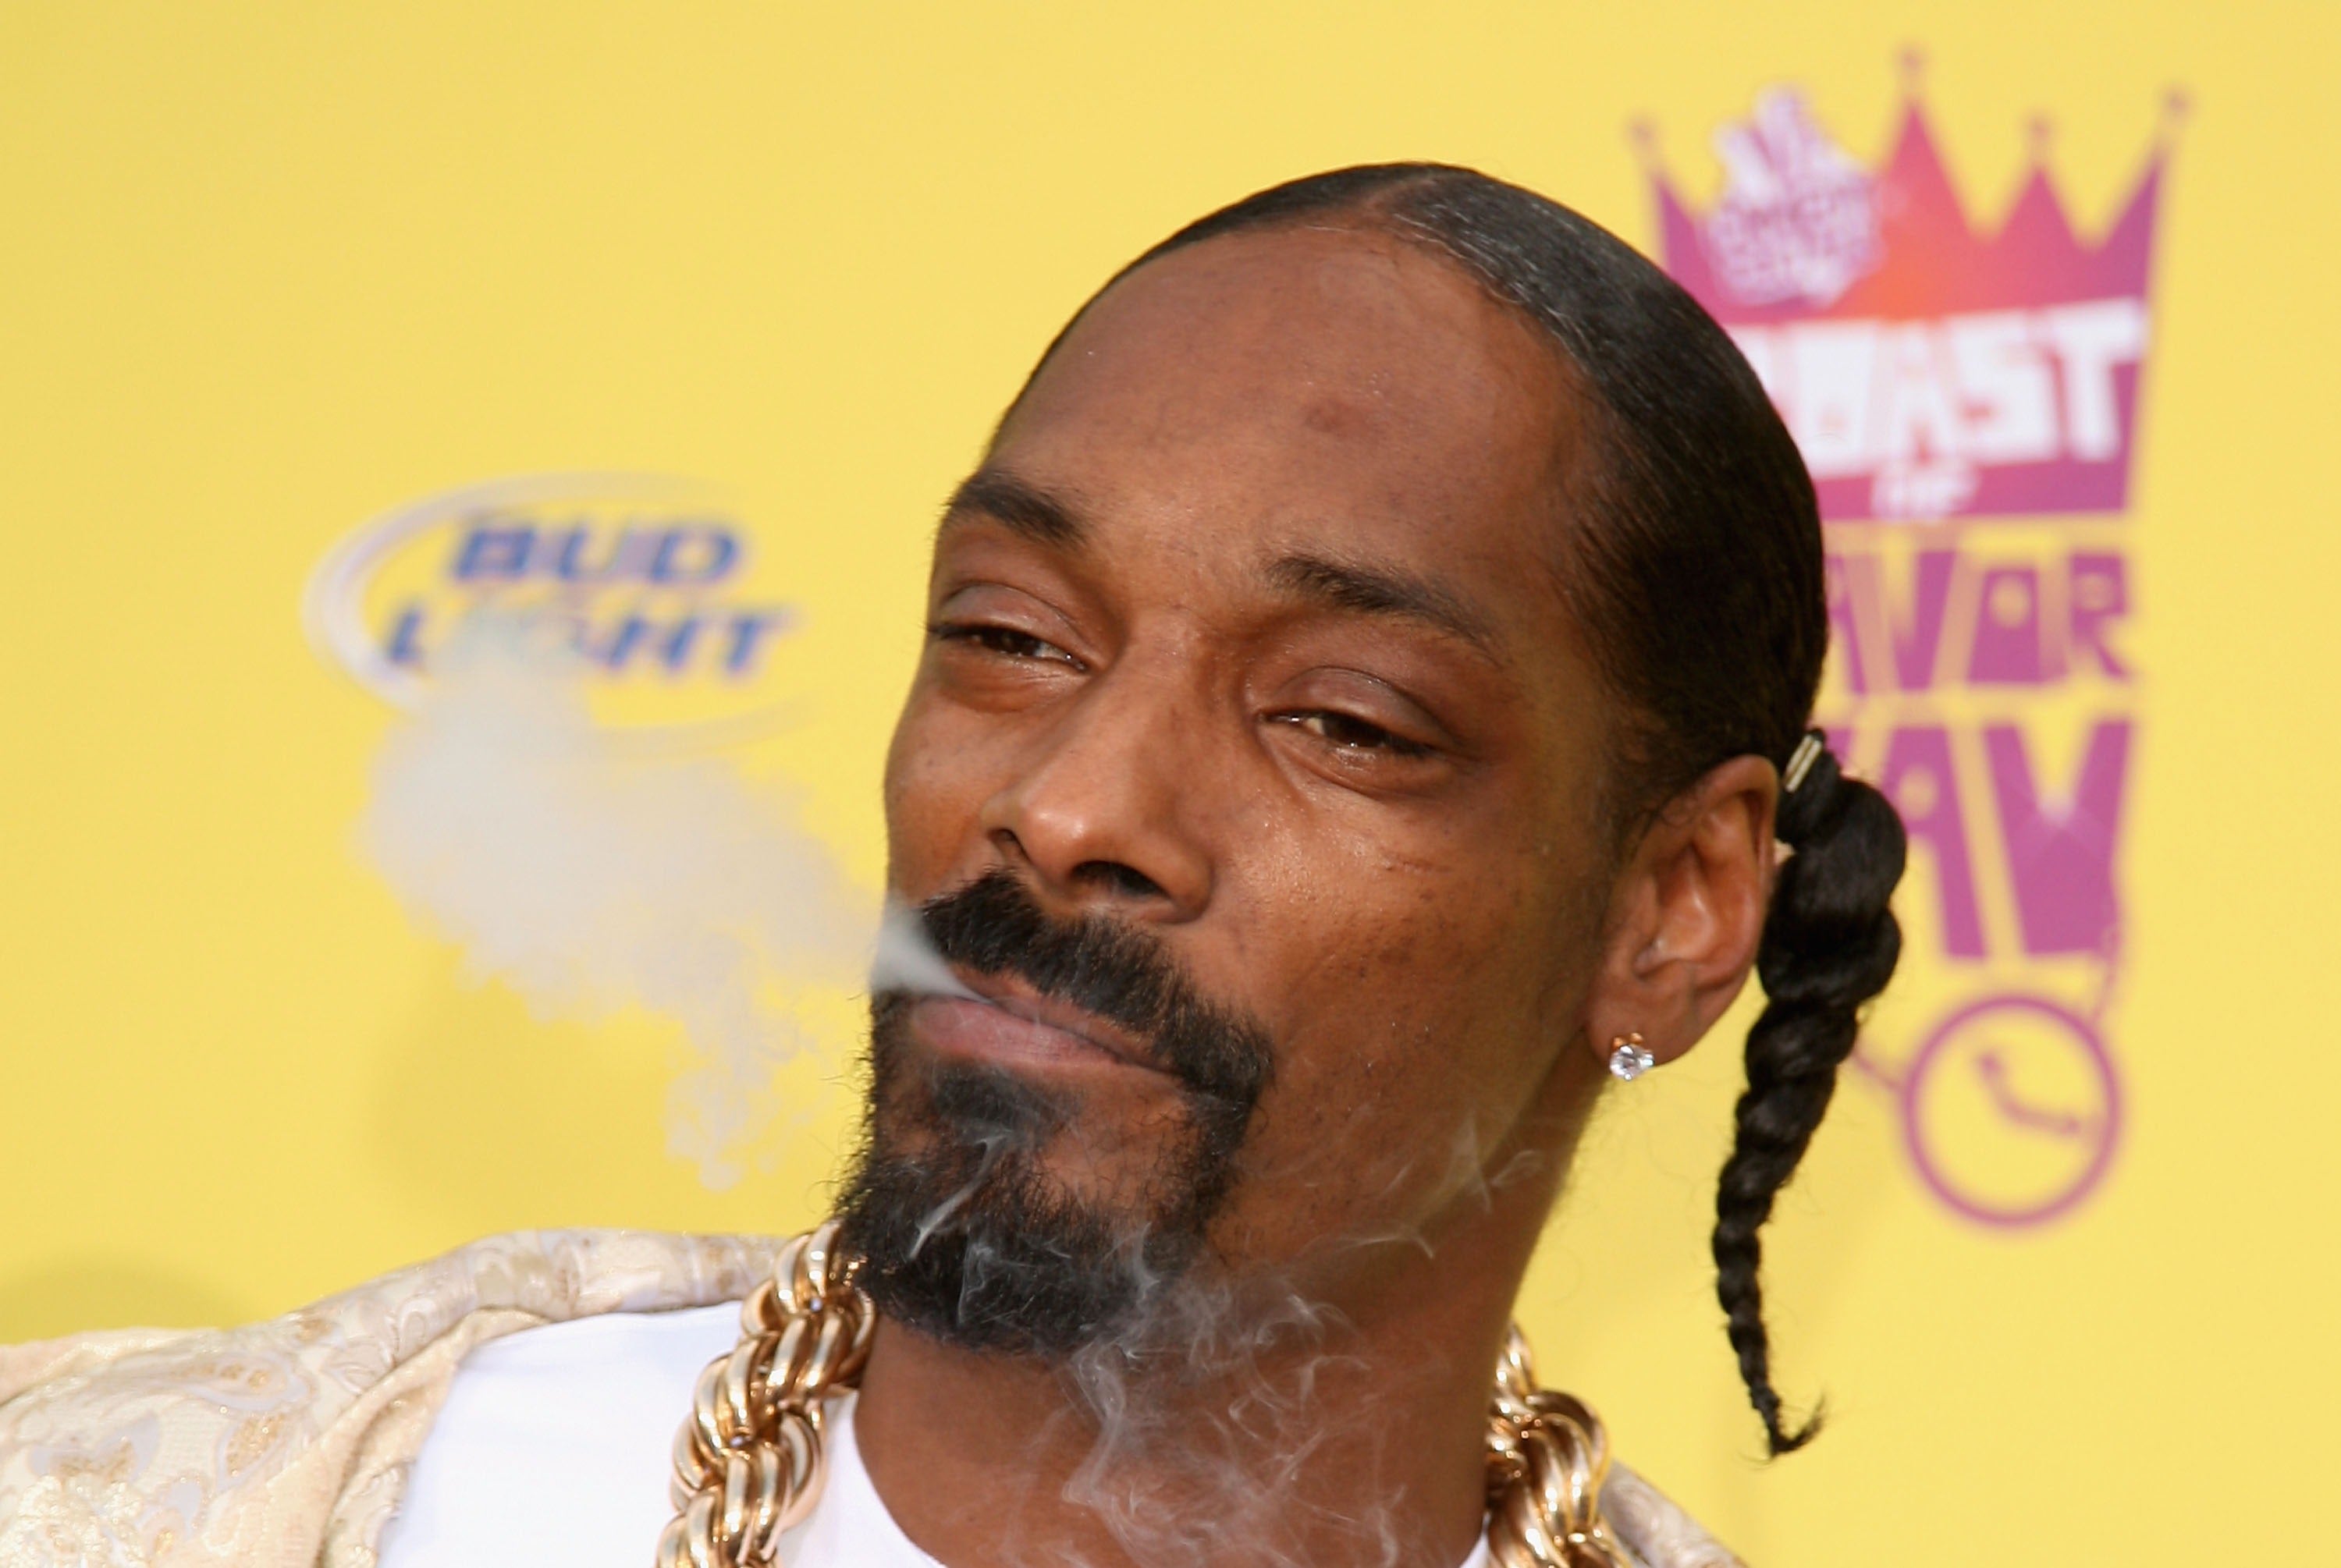 Snoop Dogg is well-known for his love of cannabis